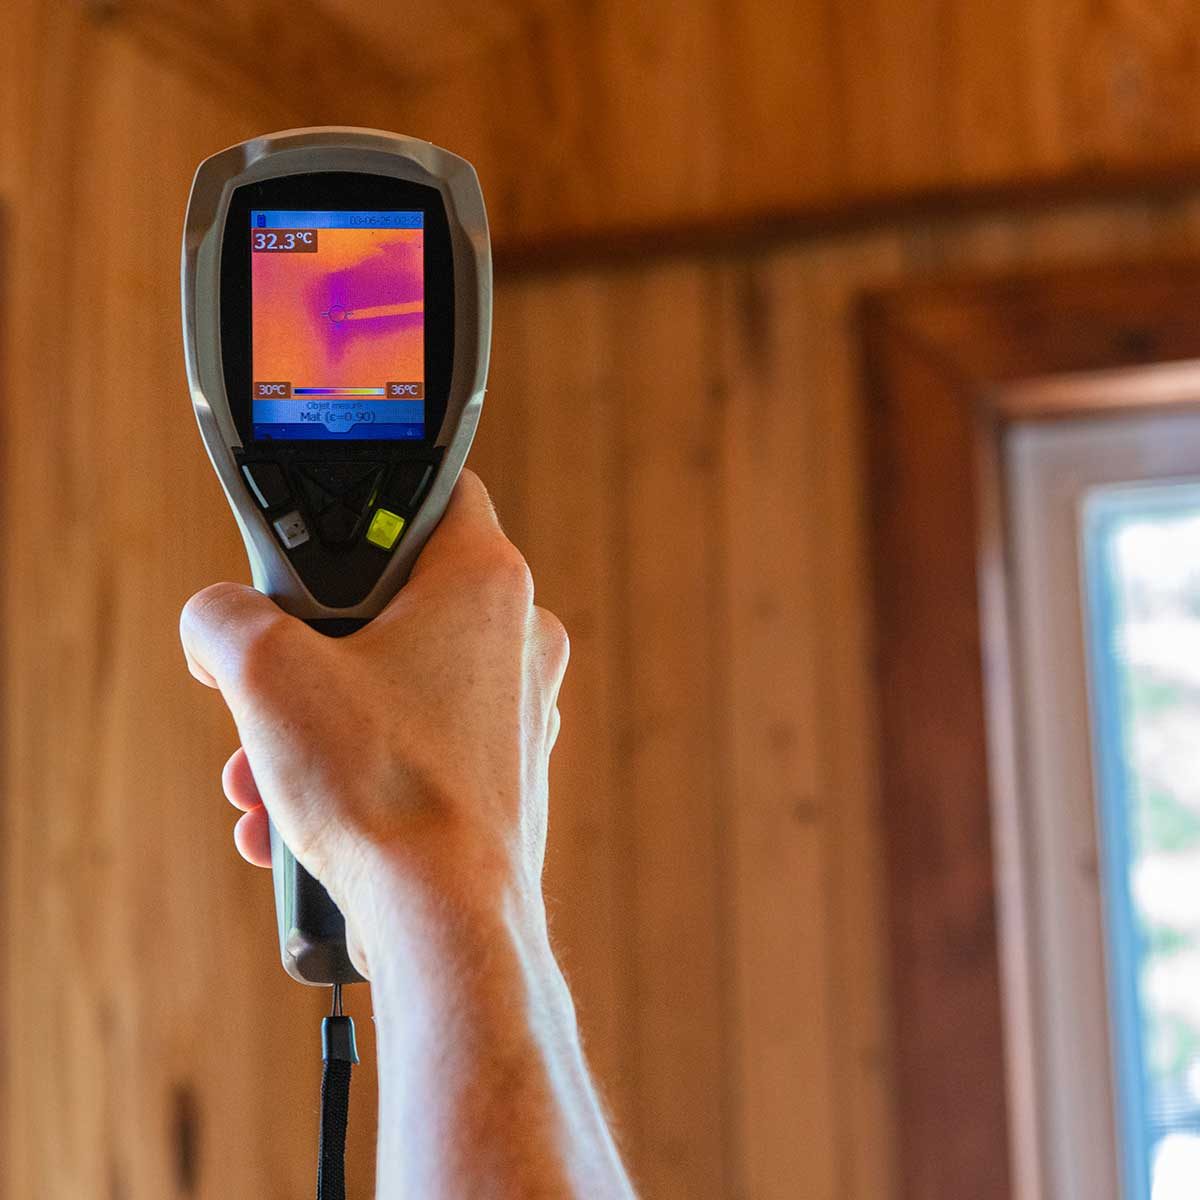 Should You Have Air Quality Monitors in Your Home? | The Family Handyman